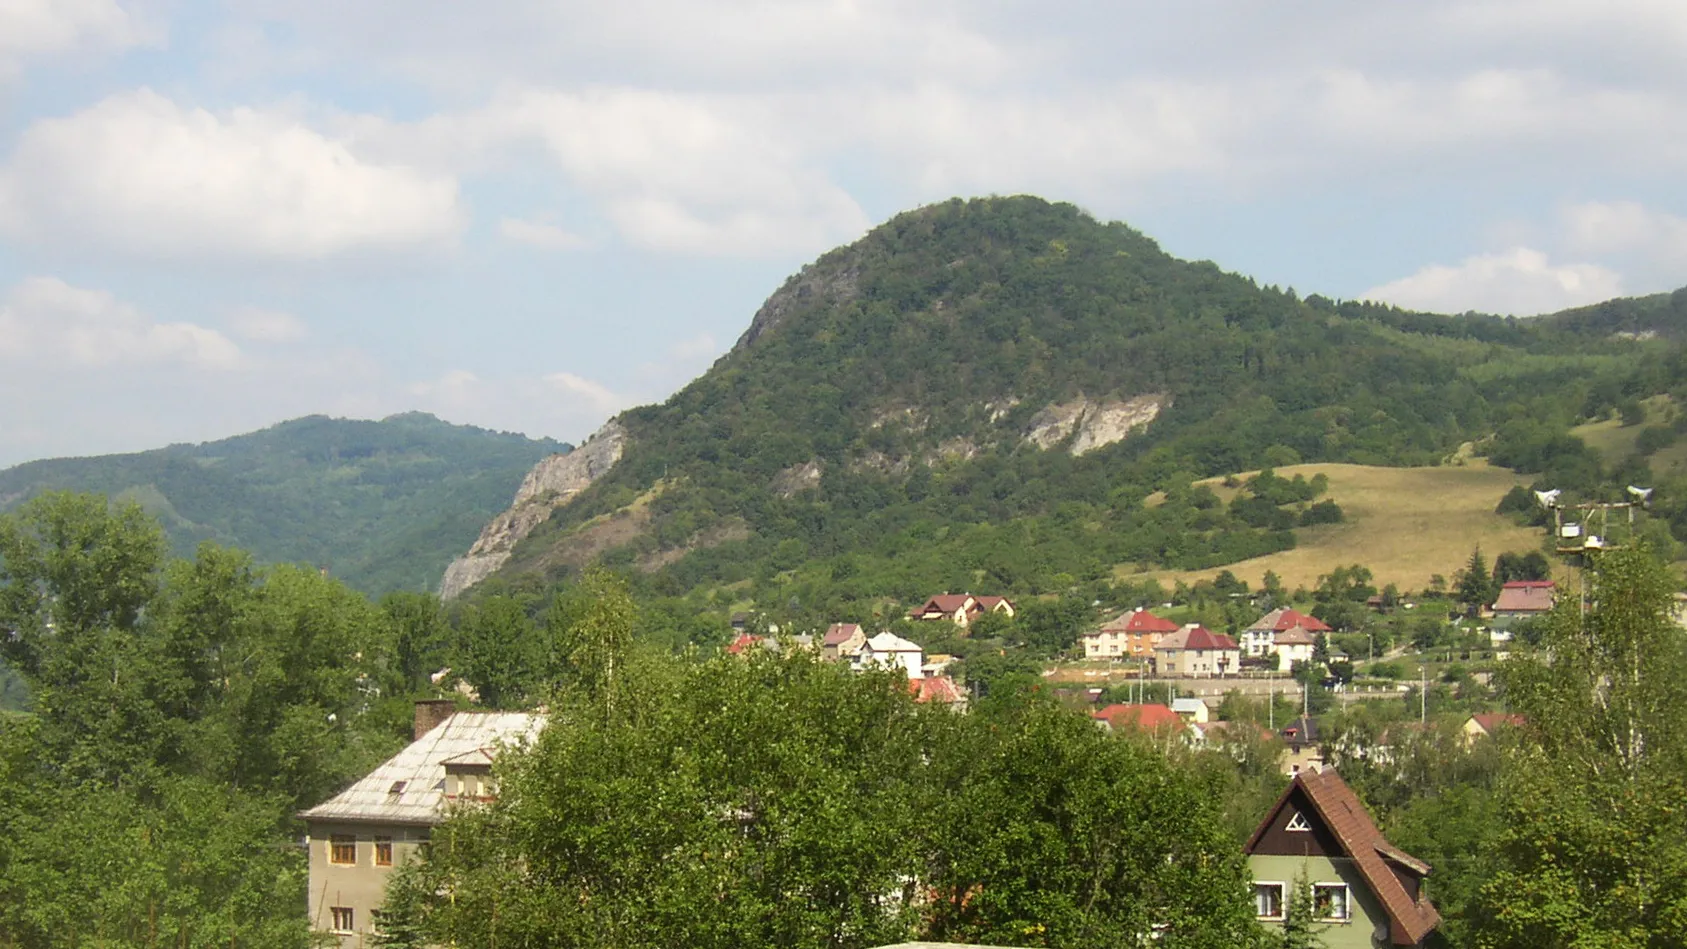 Photo showing: České středohoří, Czech Republic. Kozí vrch (Ziegenberg, 380 m) as seen from the southeast, over the Elbe from Velké Březno. Village of Neštědice (part of Povrly municipality) is located at the foothill. Left (western) hillside just above the house in the foreground still bears visible traces of an enormeous 18th century landslide.